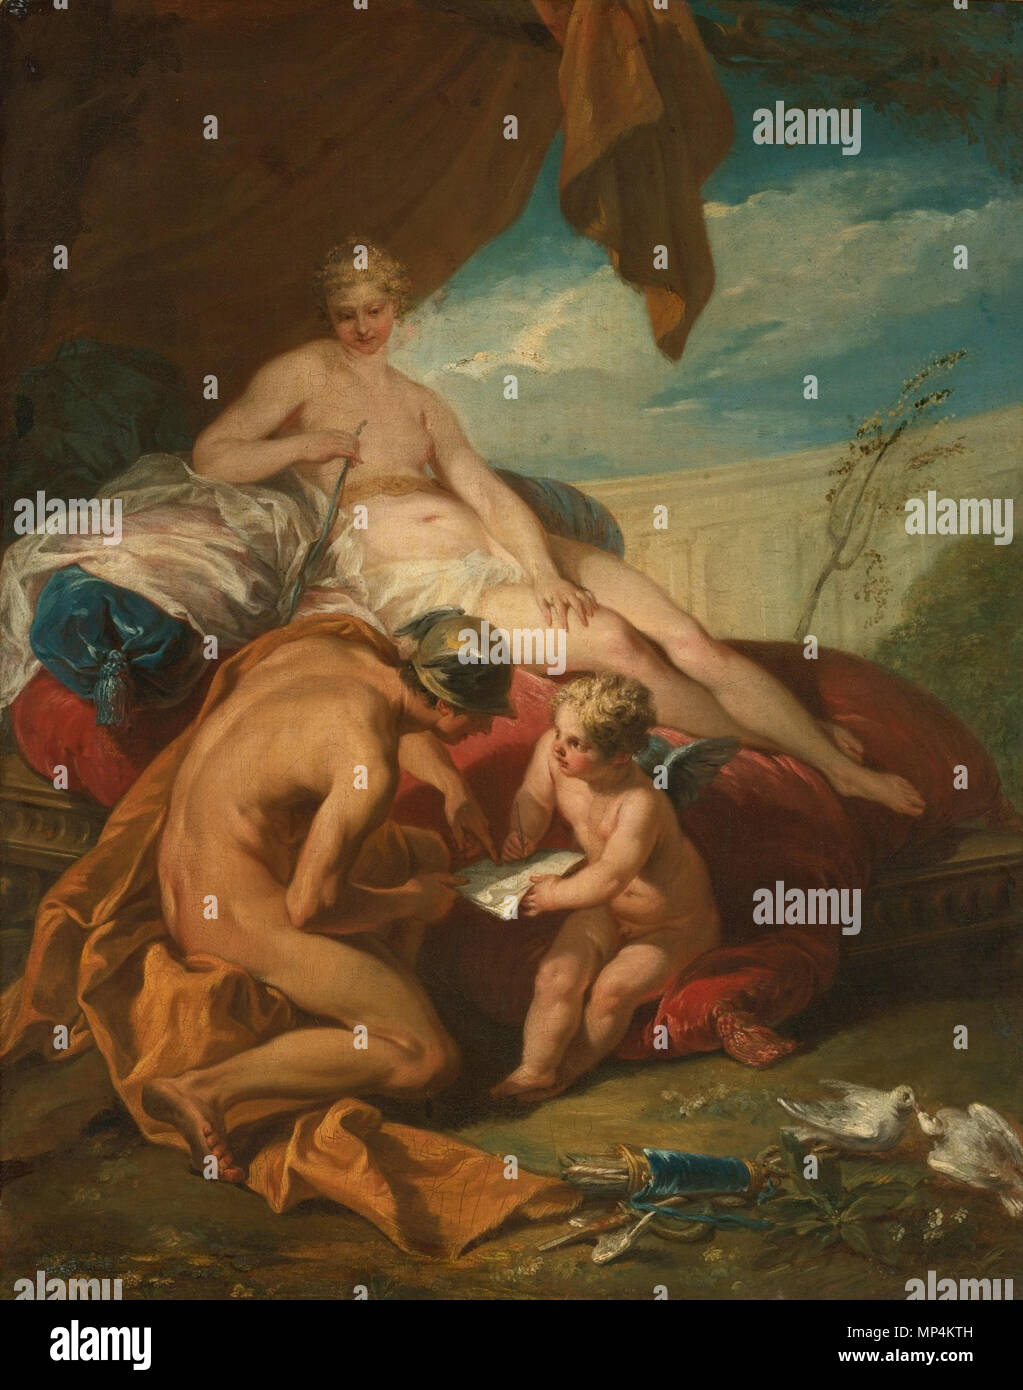 . English: JACQUES DUMONT CALLED LE ROMAIN PARIS 1701 - 1781 THE EDUCATION OF CUPID oil on canvas 92.5 by 73 cm. 30 January 2013, 13:15:43. Jacques Dumont (1704-1781) 689 Jacques Dumont (1704-1781) The education of Cupid Stock Photo